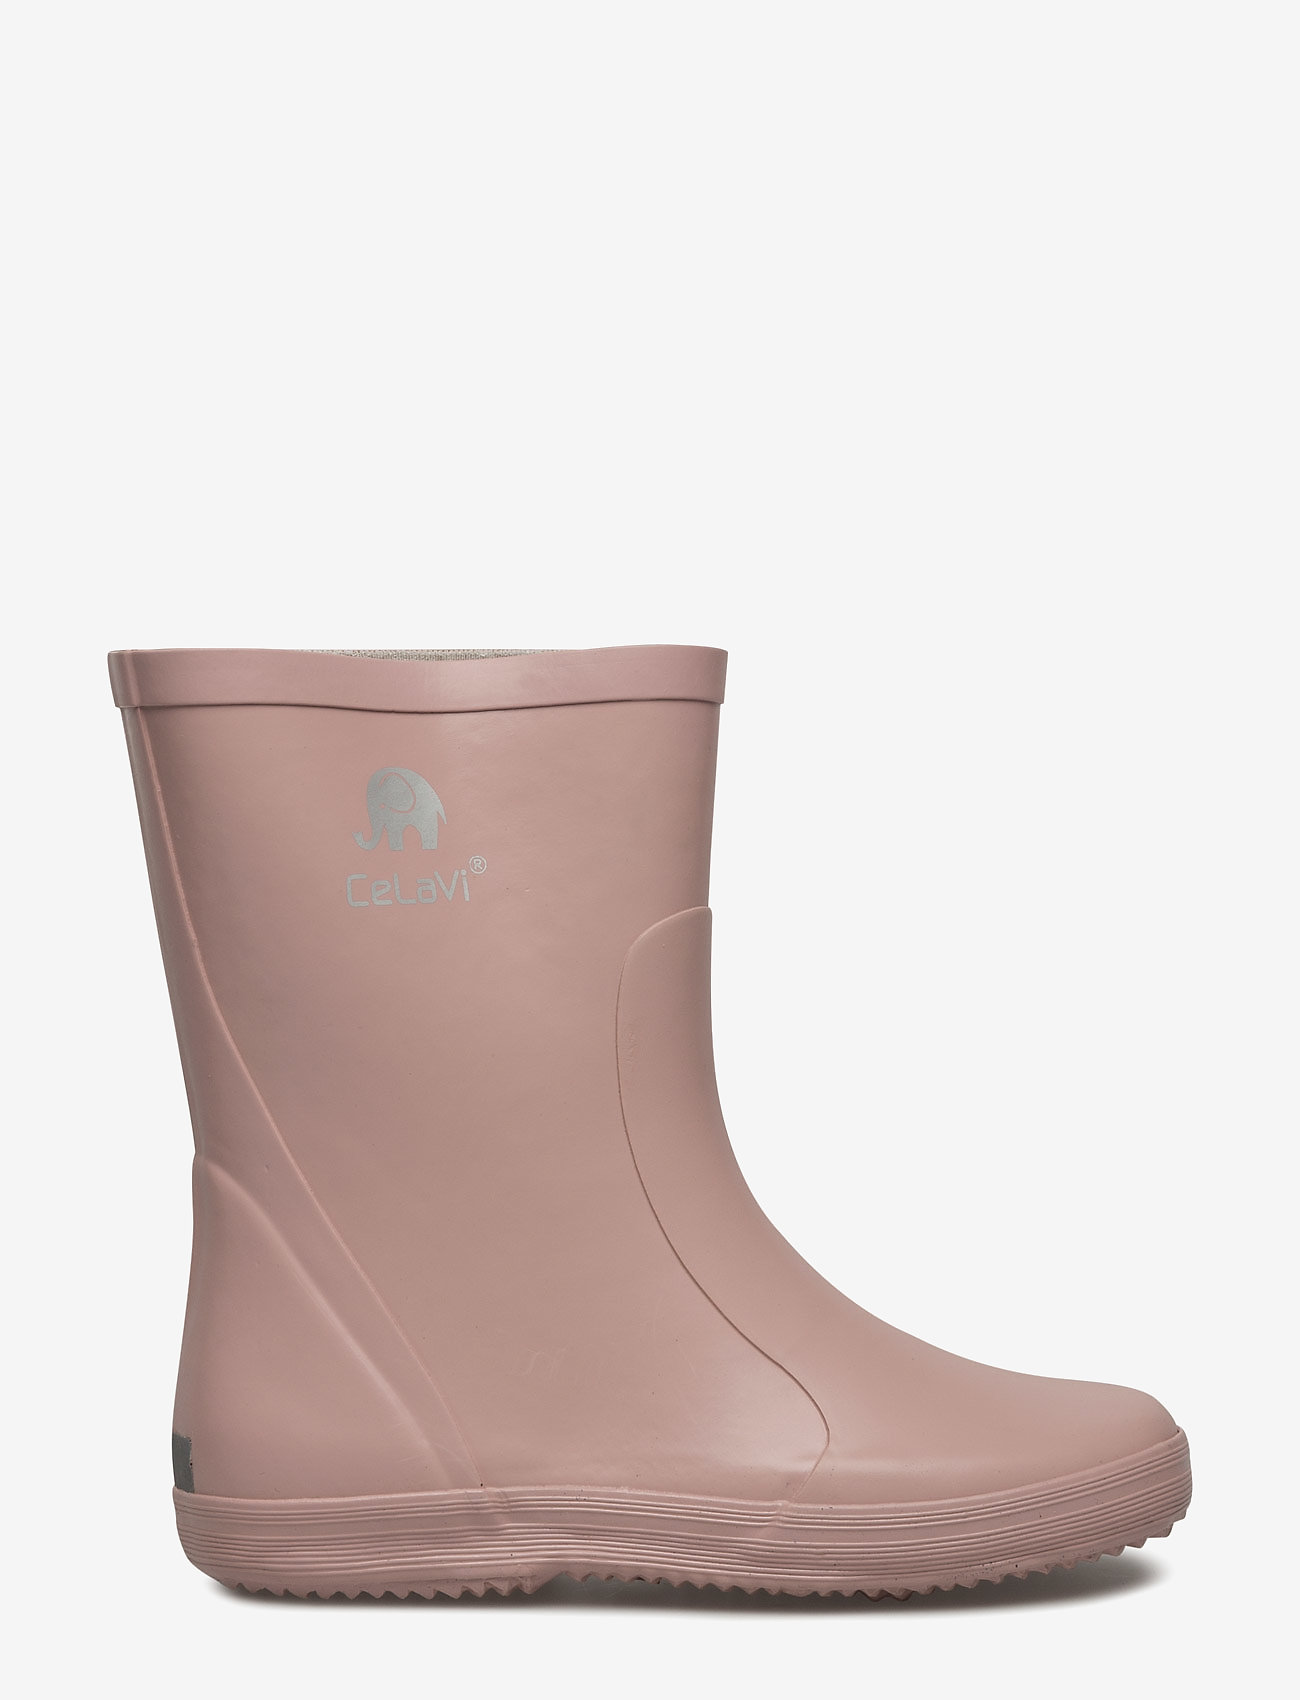 CeLaVi - Basic wellies -solid - unlined rubberboots - misty rose - 1